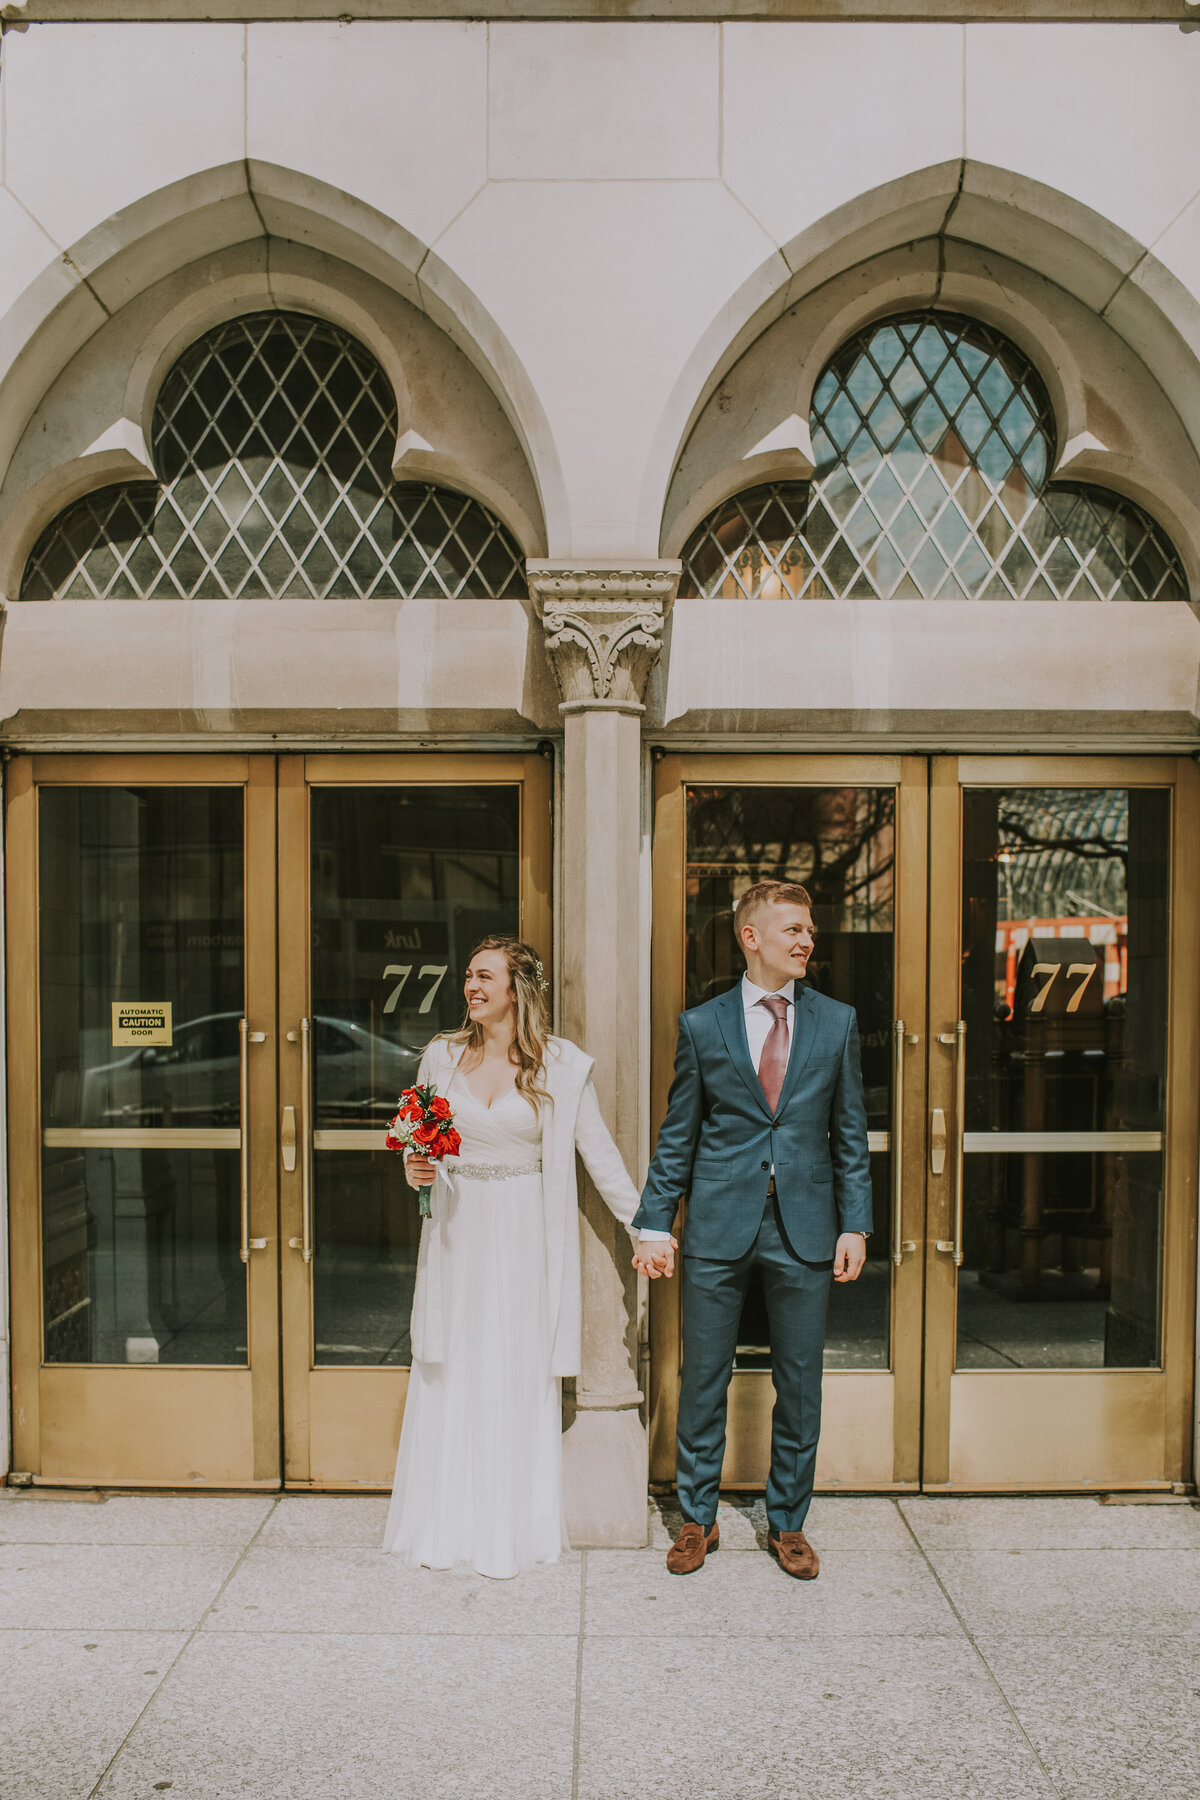 Emma & Vukasin Courthouse Wedding in Chicago March 2019 (278)